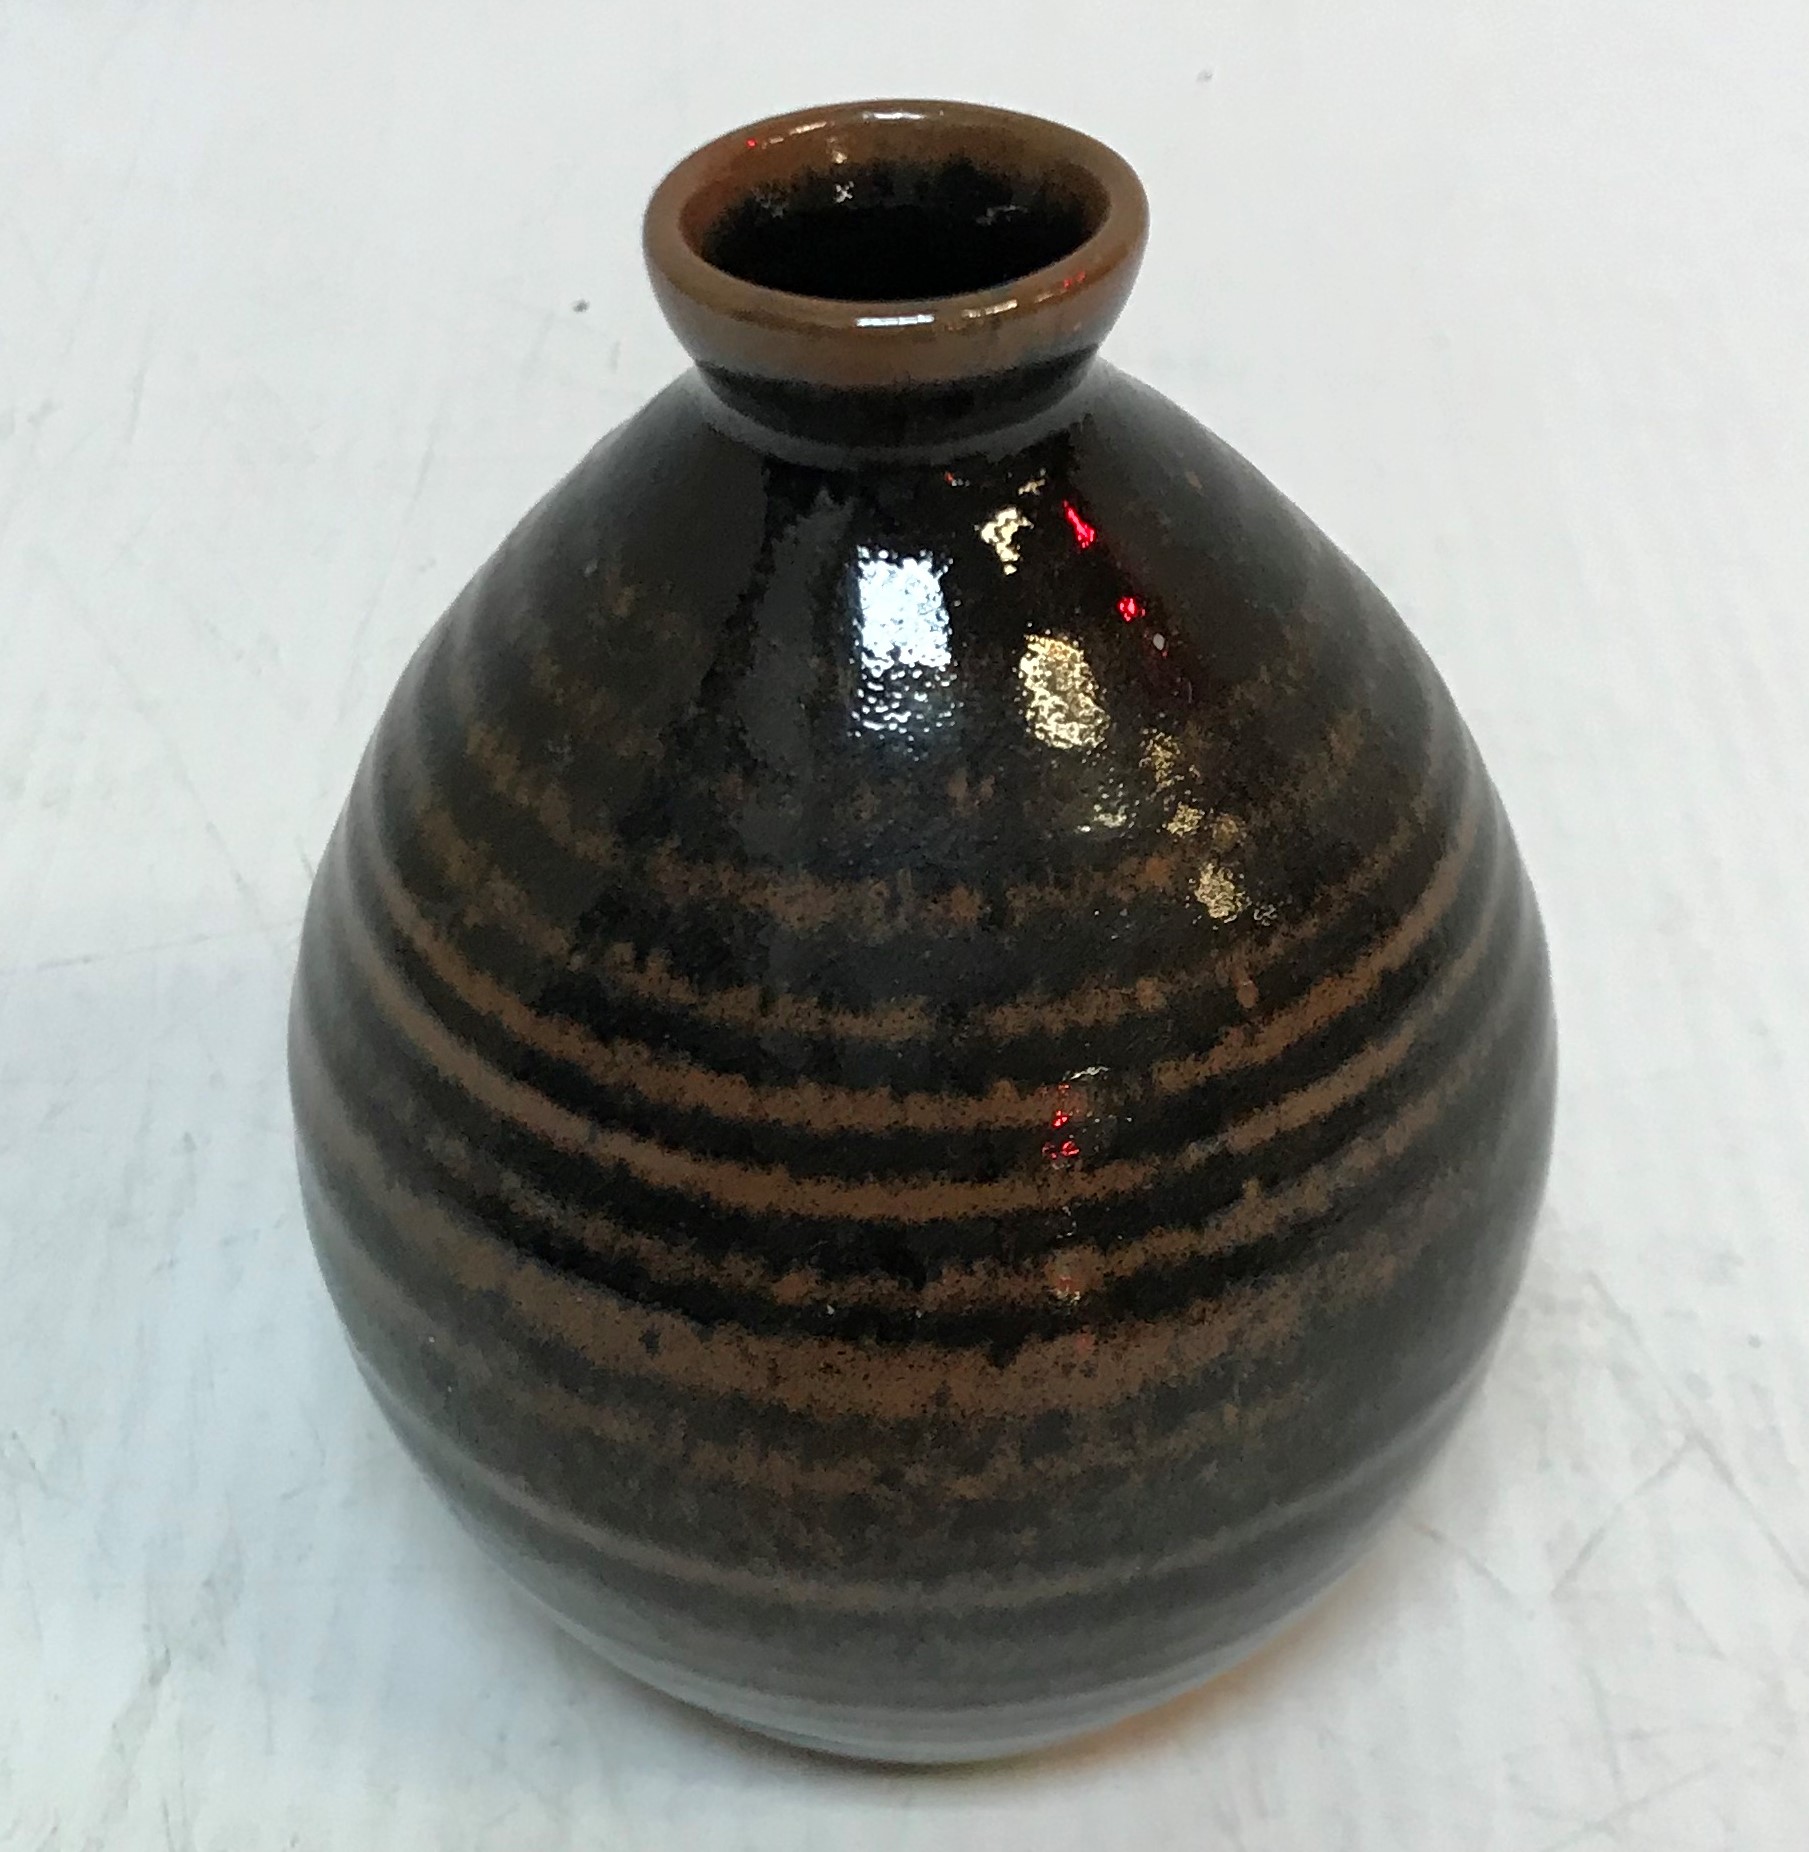 A Michael Leach "Yelland" vase with ribb - Image 4 of 4